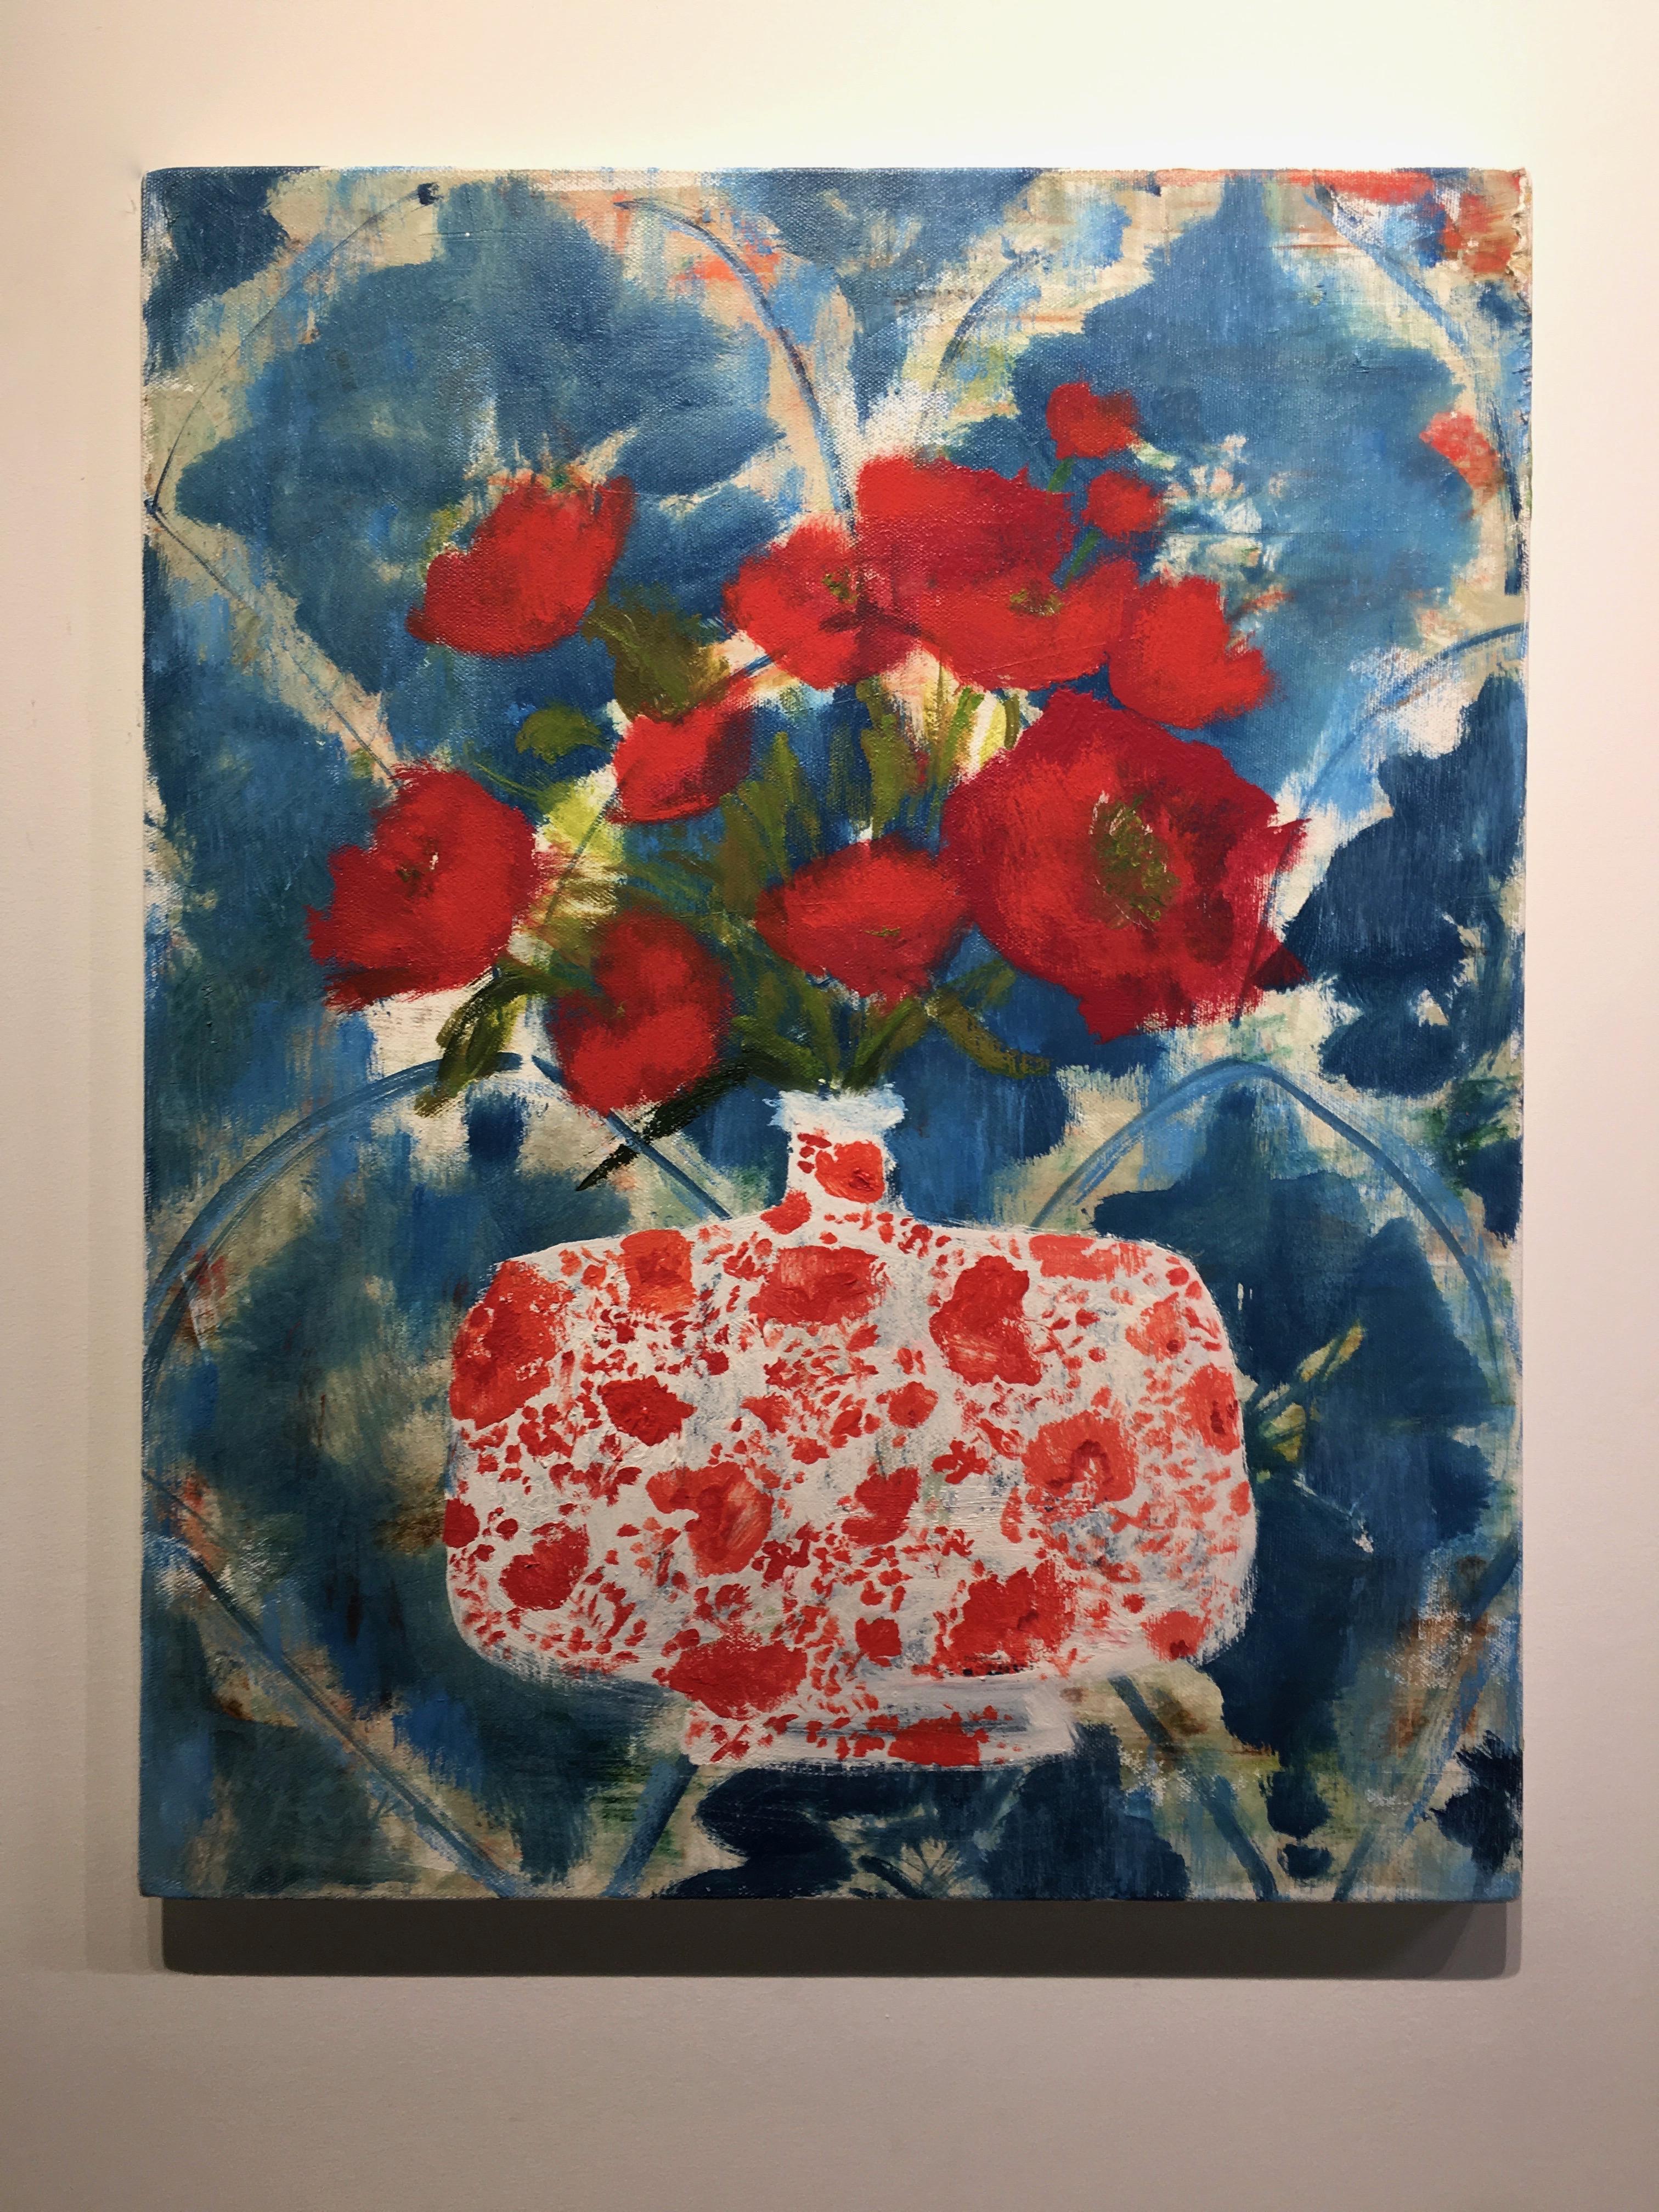 Night Linen, Botanical Still Life with Red Flowers in Vase with Blue Background - Painting by Melanie Parke